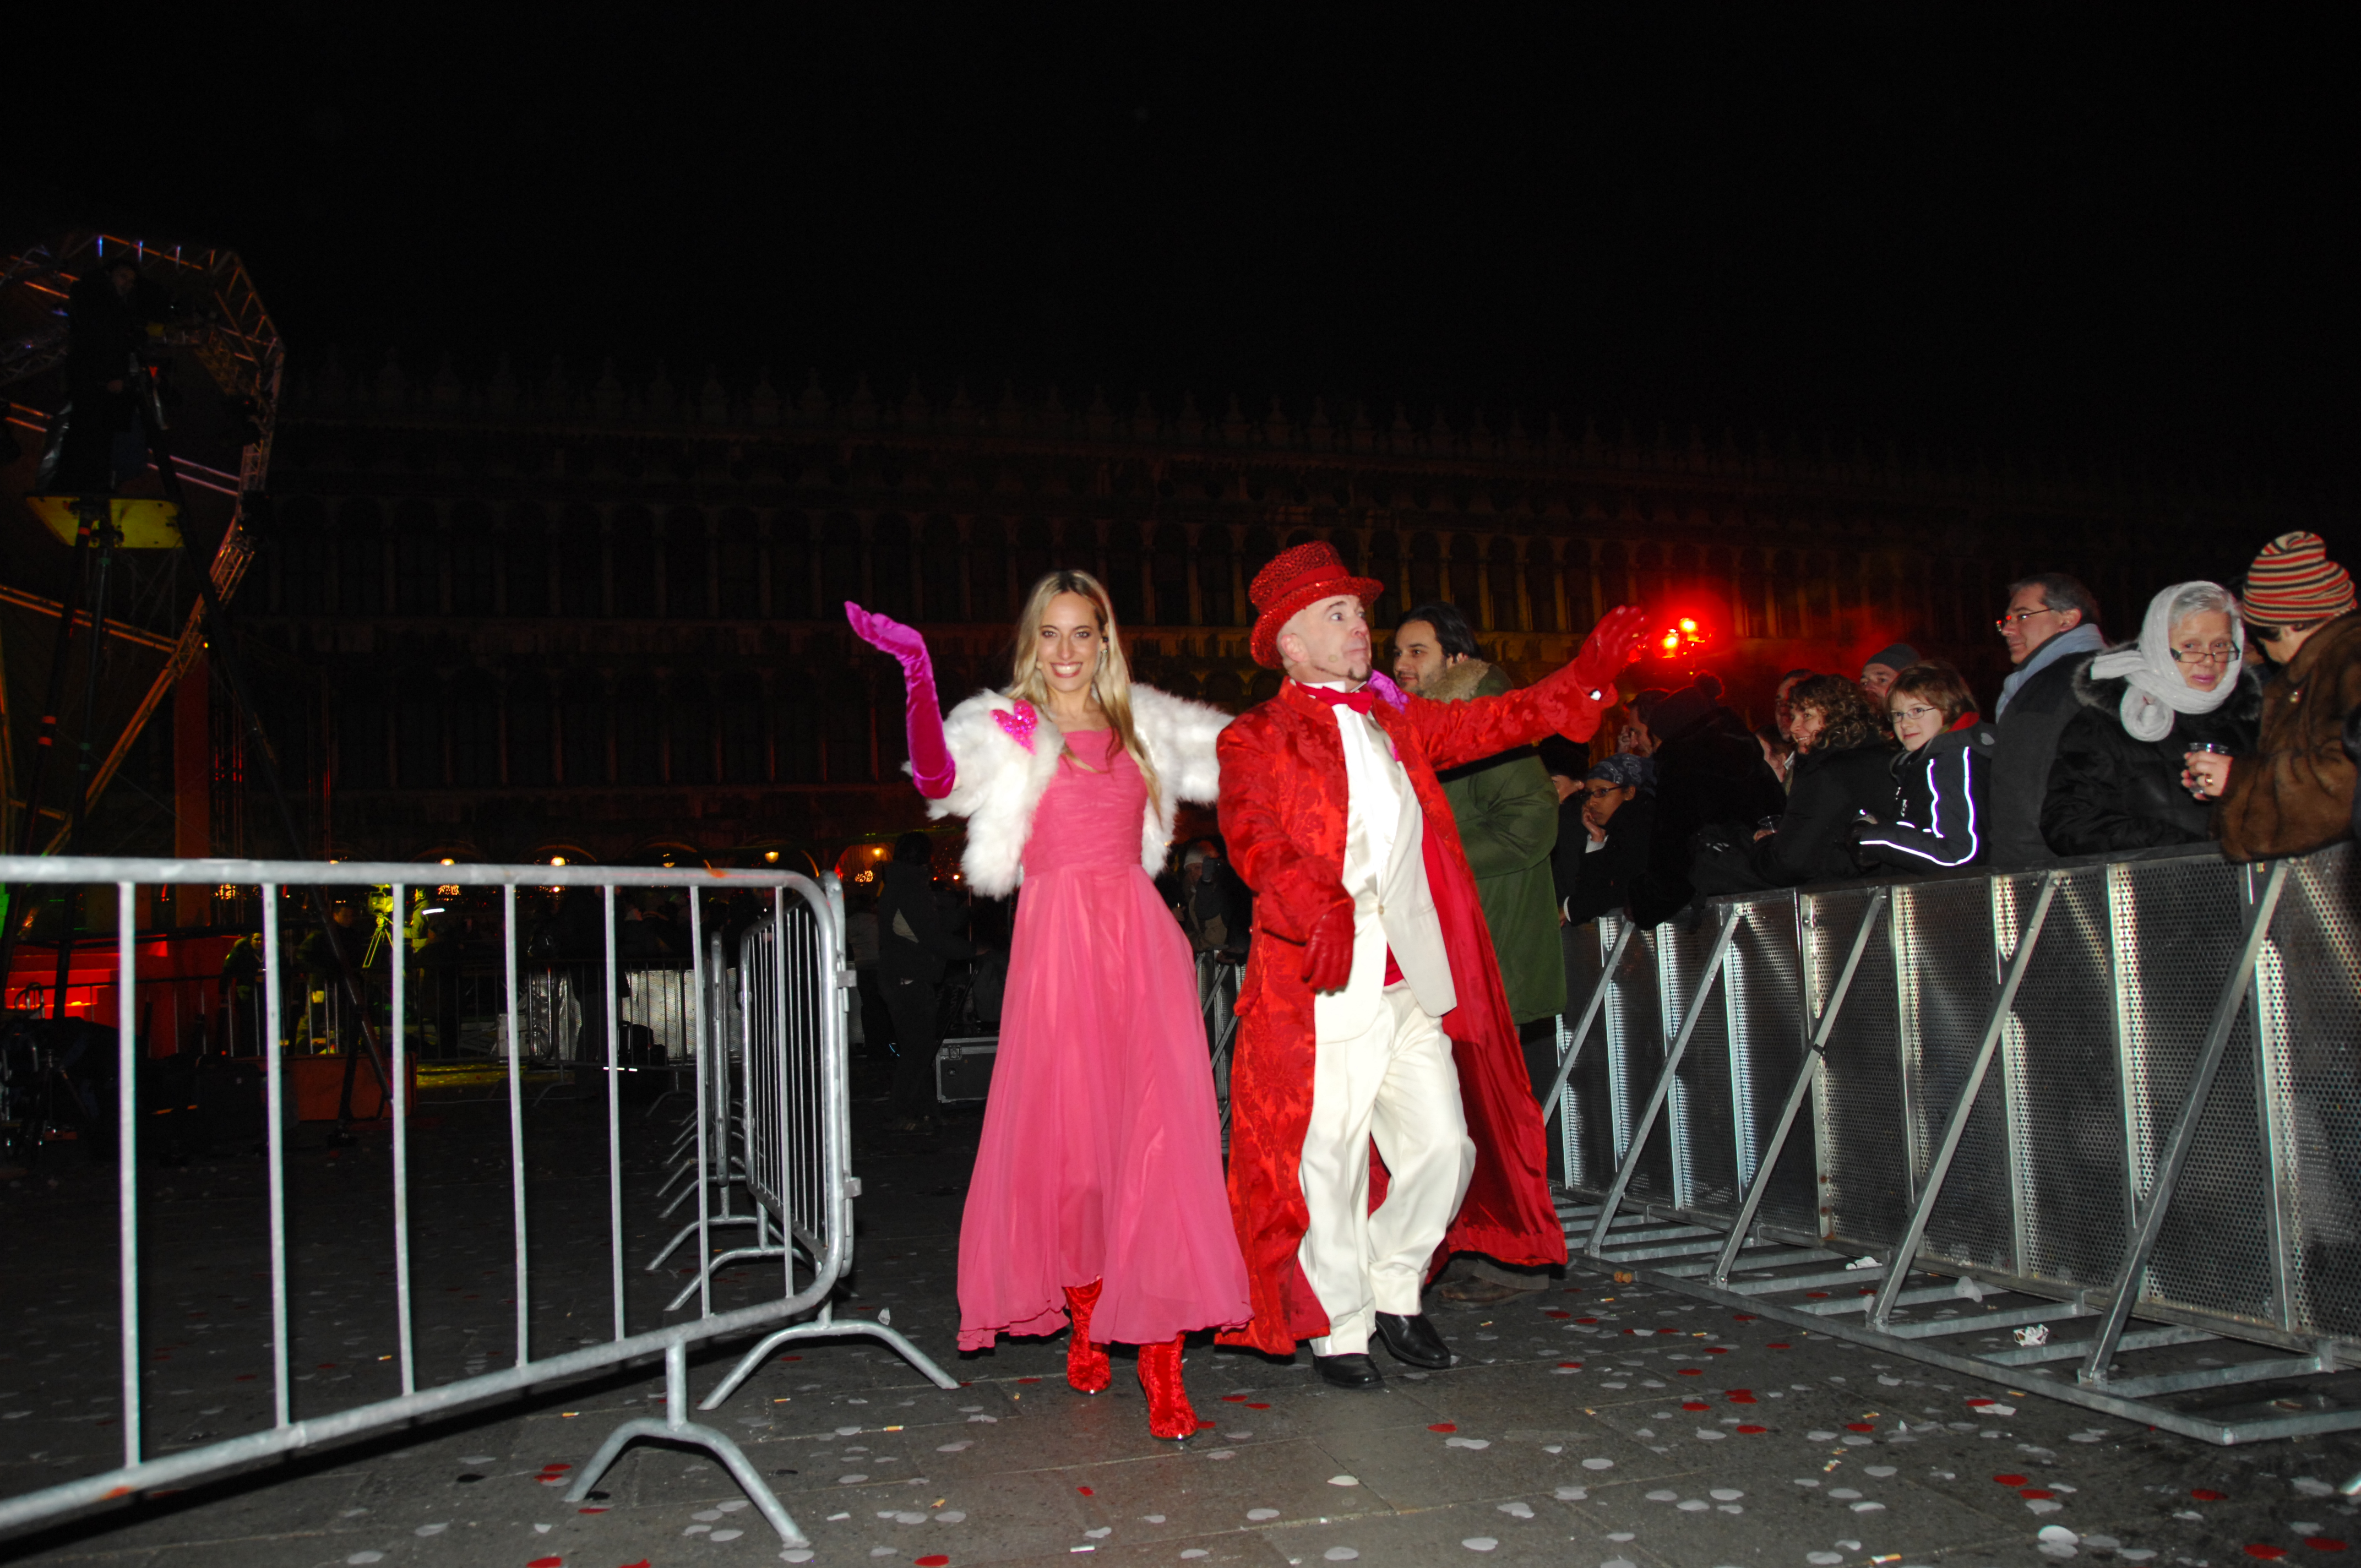 Jessica Polsky leaves the stage with co-host, Doug Jack, after hosting the internationally broadcast New Year's Eve event in Venice's Saint Mark's Plaza, to a live crowd of over 90,000.